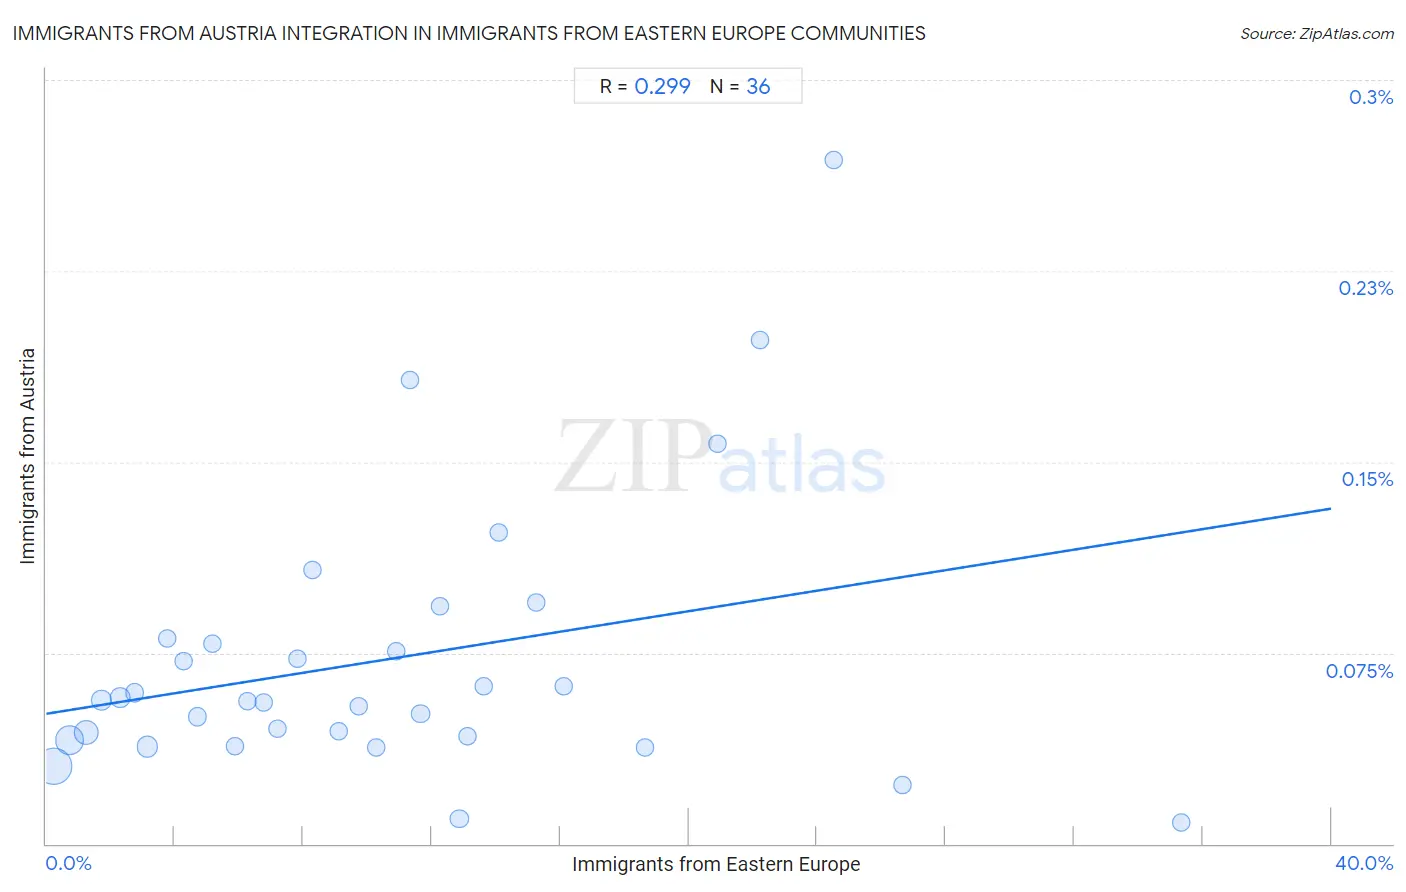 Immigrants from Eastern Europe Integration in Immigrants from Austria Communities